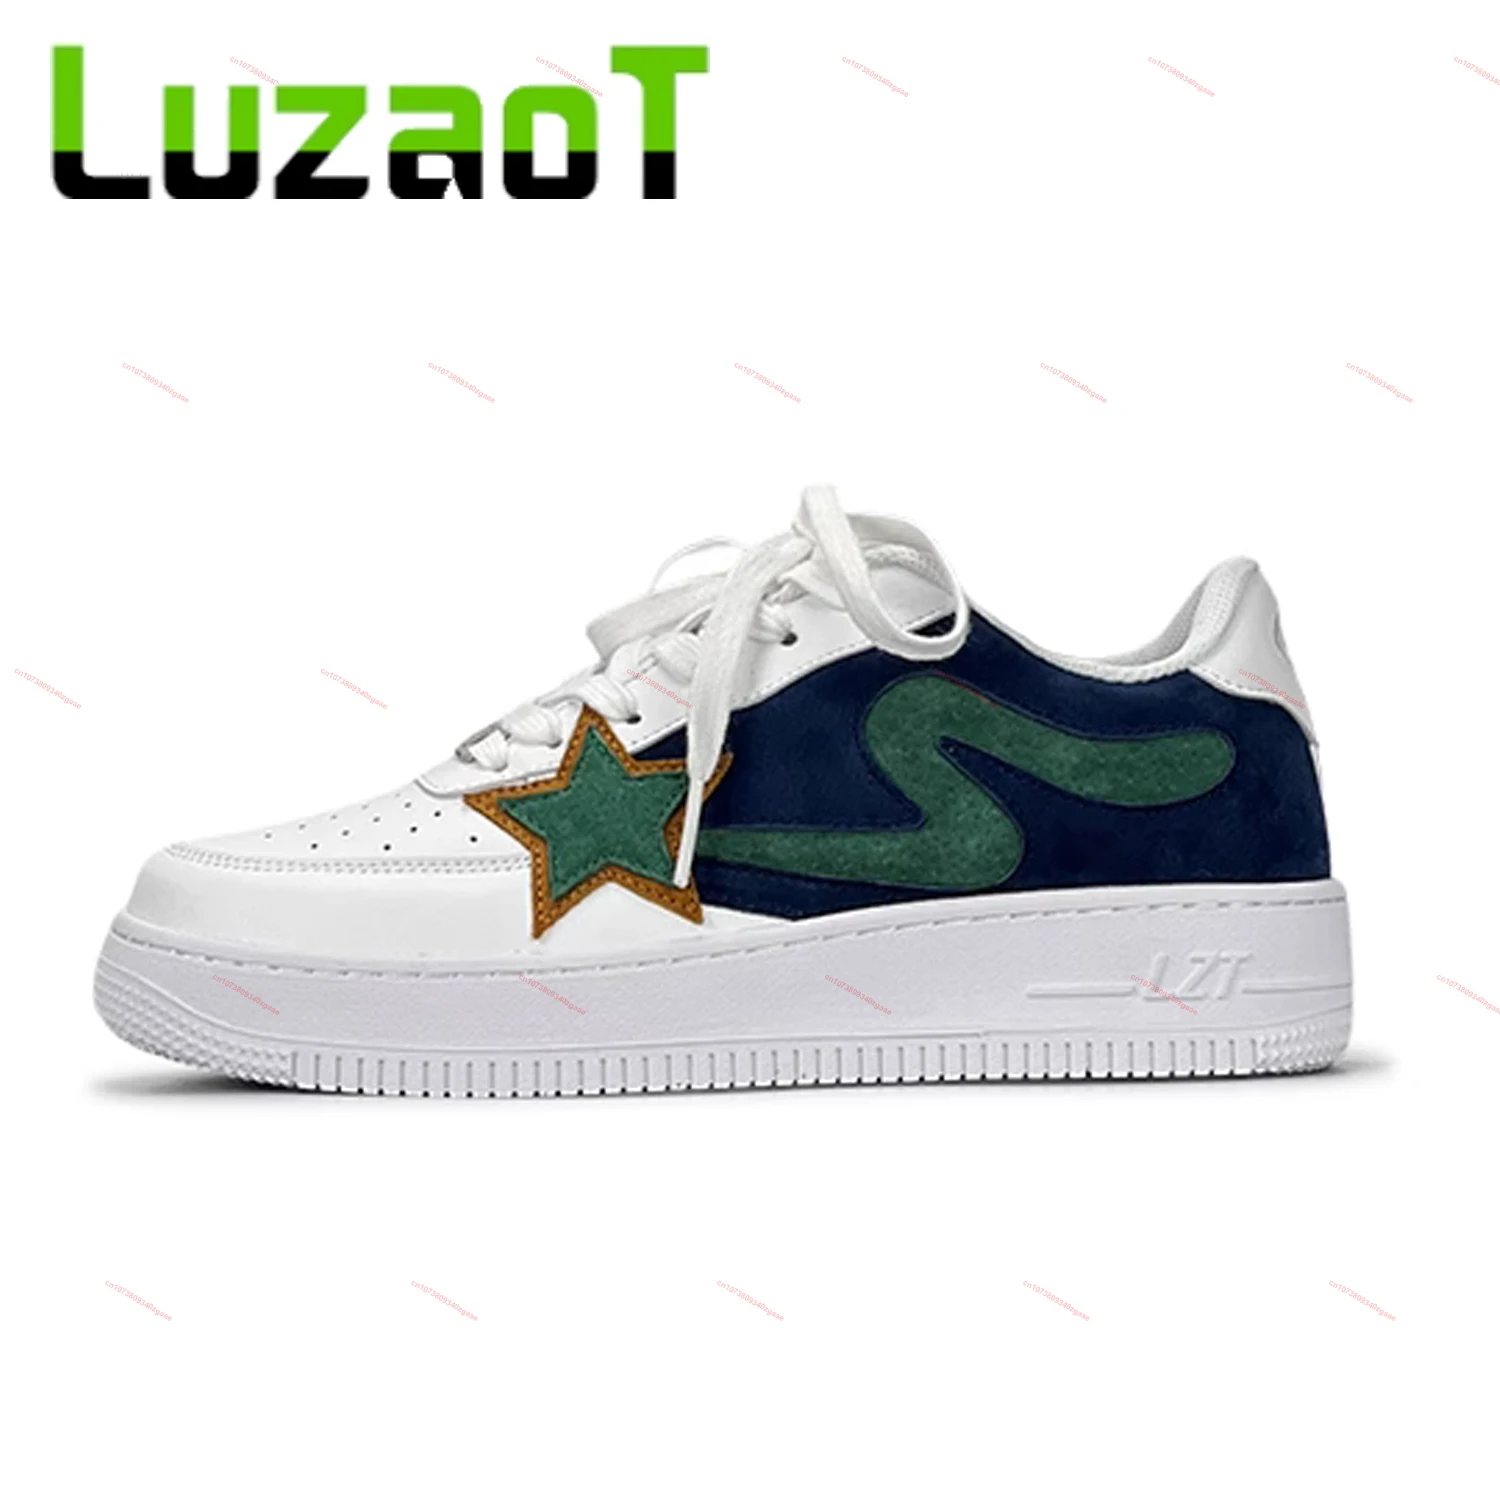 

LUZAOT Skate Shoes Men and Women Brown Star Sneakers Suede Vintage Casual Running Shoes Unisex Hip Hop Street Skateboard Shoes